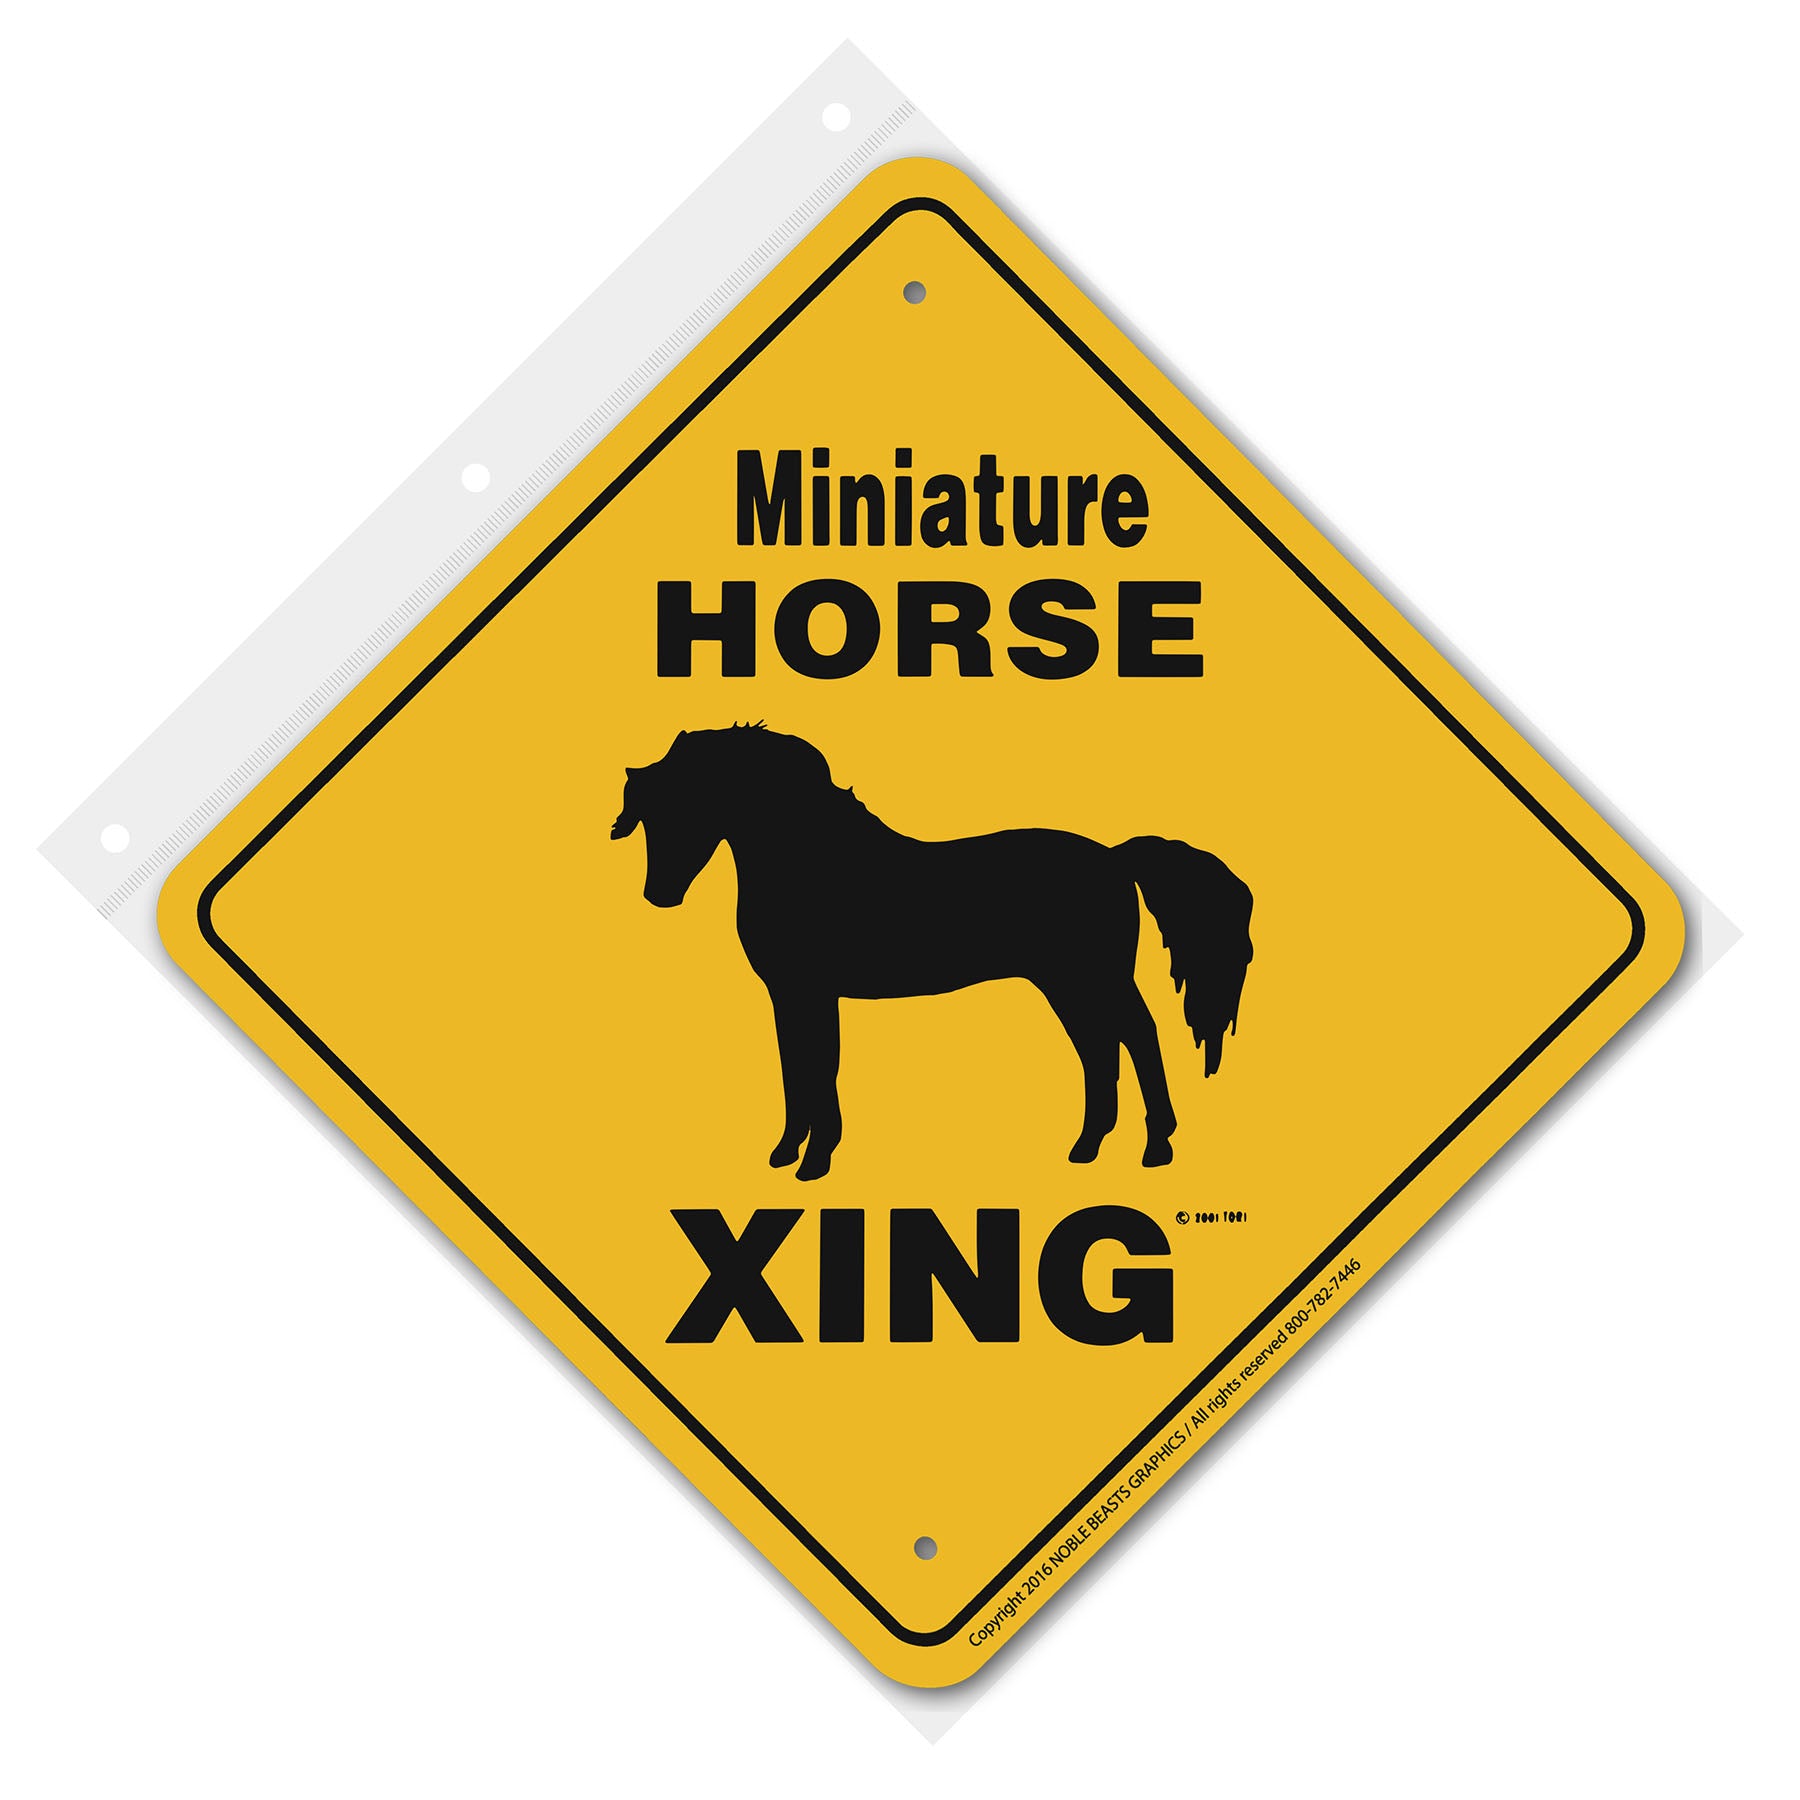 miniature horse (stand) xing 20016 front